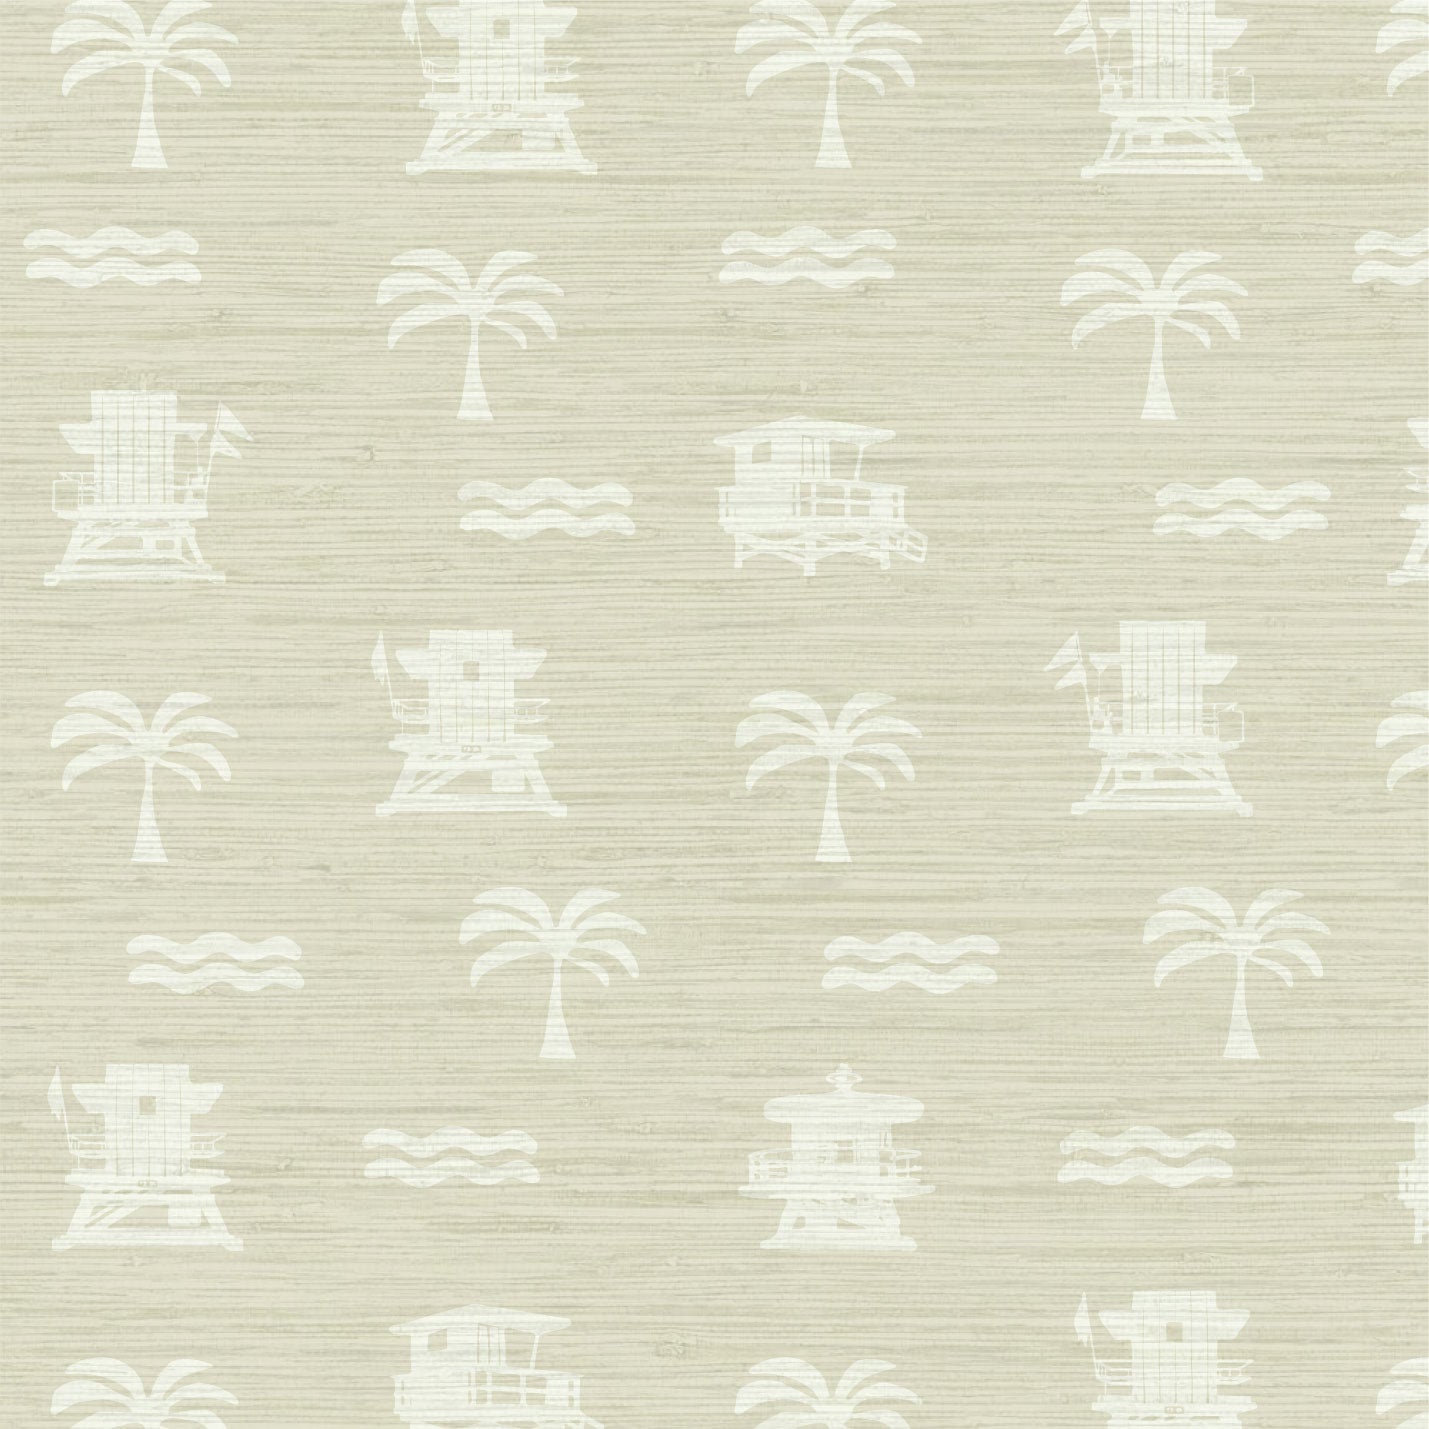 Grasscloth Natural Textured Eco-Friendly Non-toxic High-quality  Sustainable practices Sustainability Interior Design Wall covering wallpaper grid seaside coastal seashore waterfront vacation home styling retreat relaxed beach vibes beach cottage shoreline oceanfront nautical tropical ocean waves palm tree lifeguard stand mini print custom interior design beach house tan off-white white cream sand